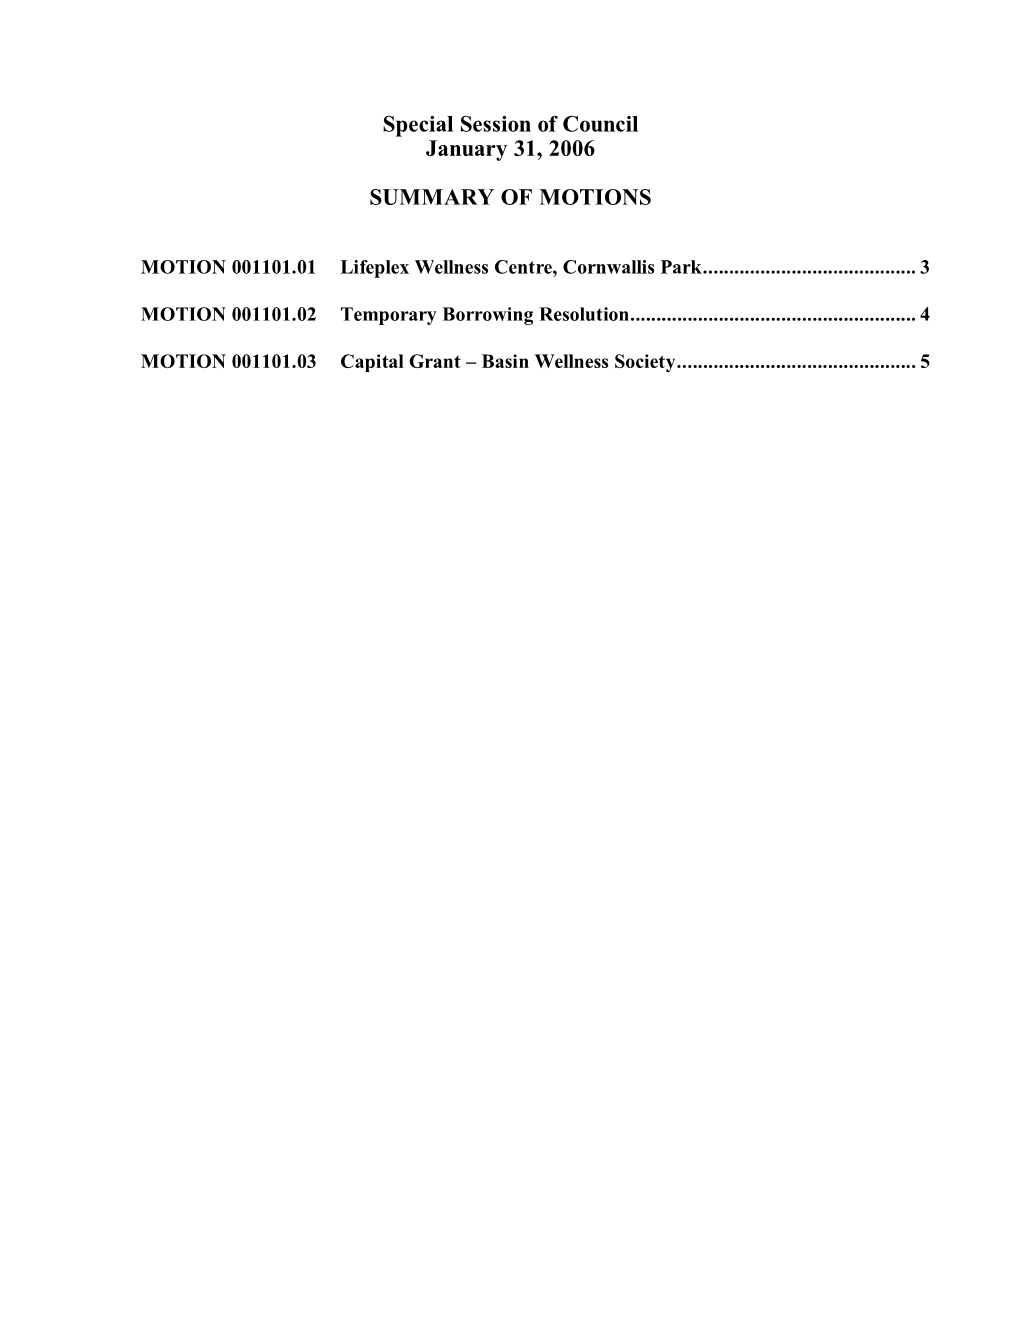 Special Session of Council January 31, 2006 SUMMARY of MOTIONS